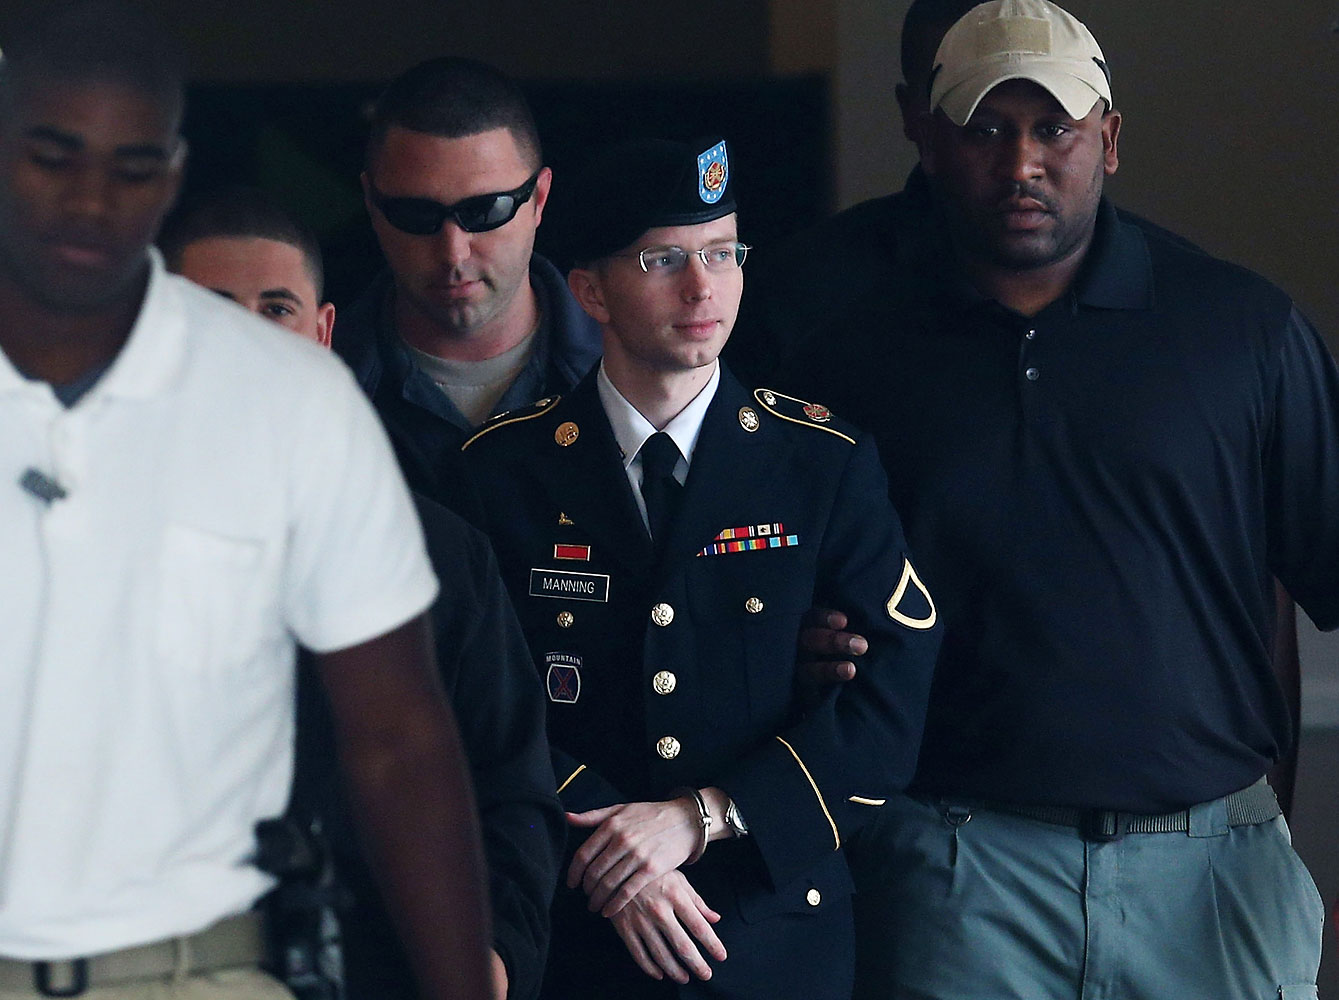 Bradley Manning, now known as Chelsea Manning, being escorted out of a military-court facility in Fort Meade, Md., on Aug. 20, 2013 (Mark Wilson—Getty Images)